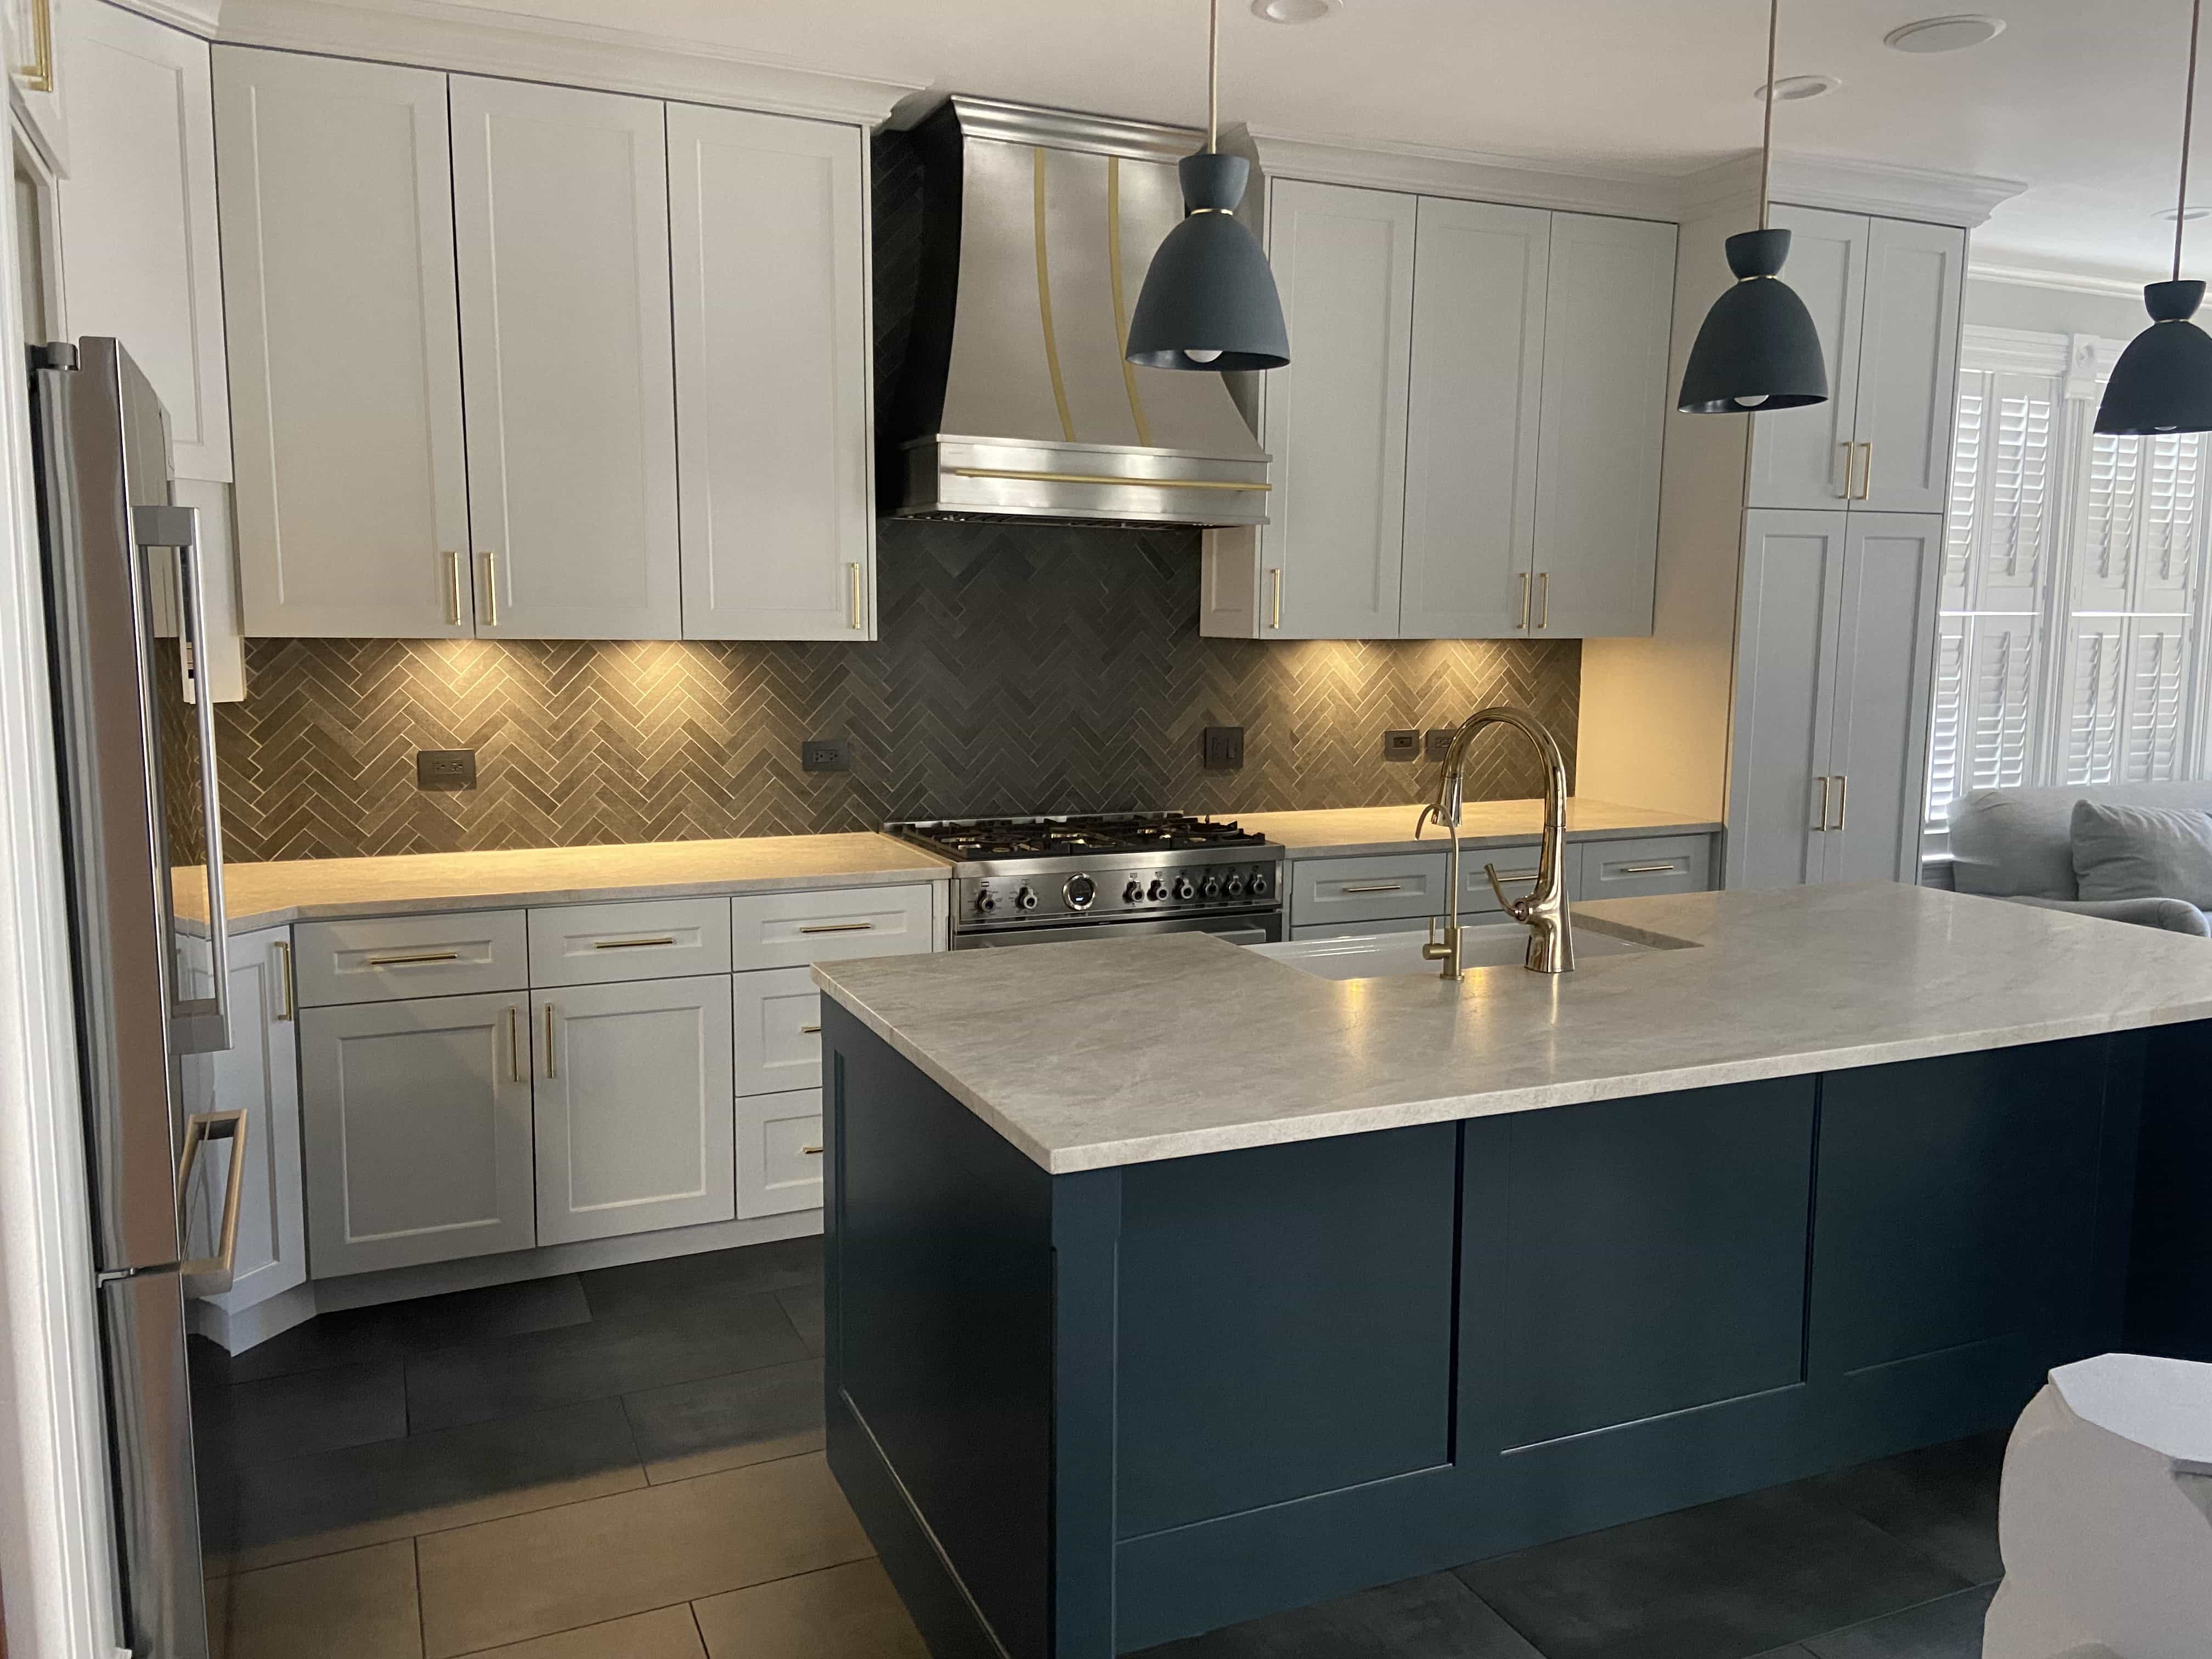 CopperSmith Signature SX4 Brushed Stainless Steel Range Hood in a contemporary kitchen featuring blue and white cabinets white countertops and back tile backsplash